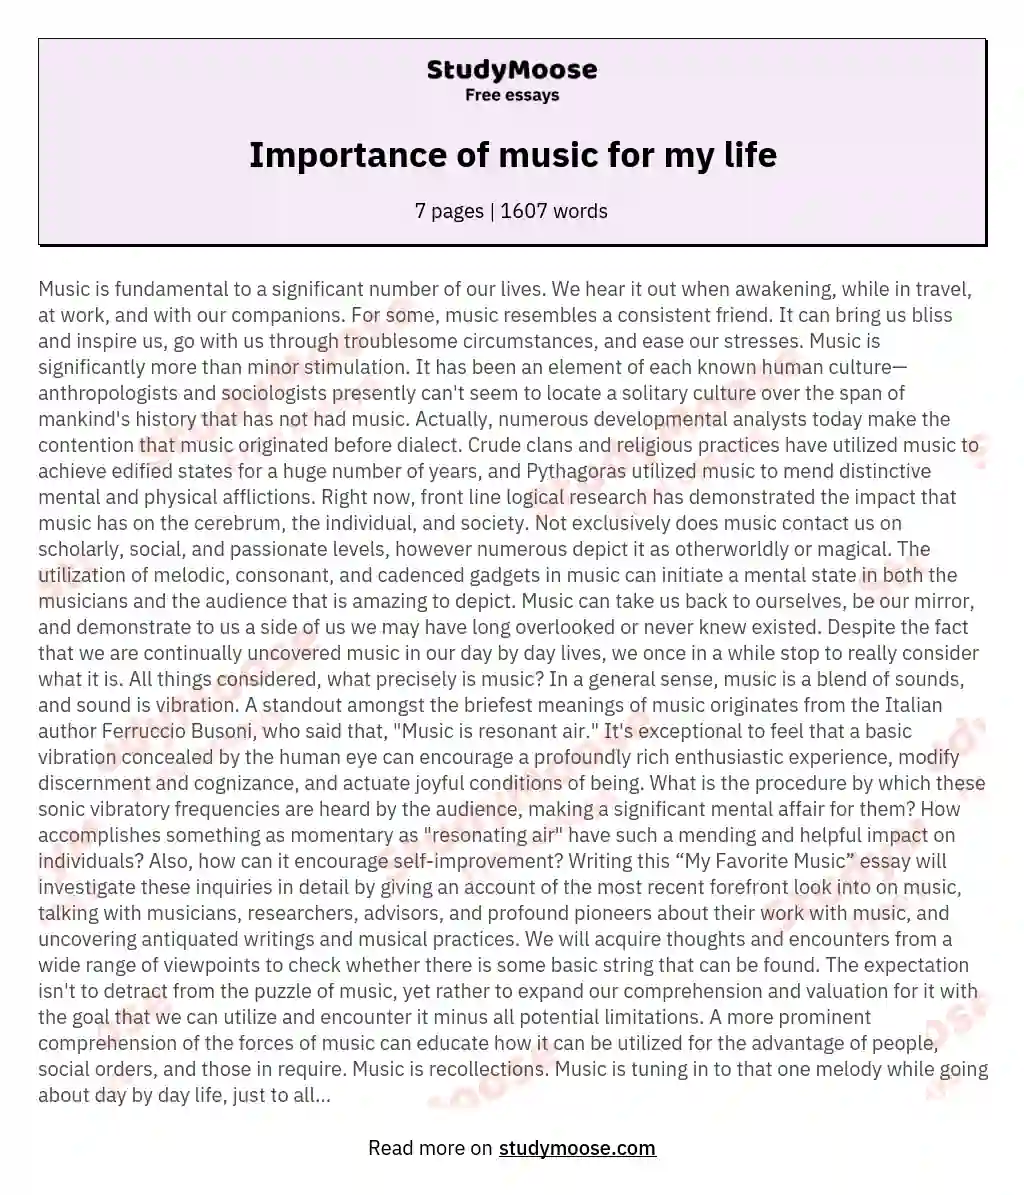 Importance of music for my life essay